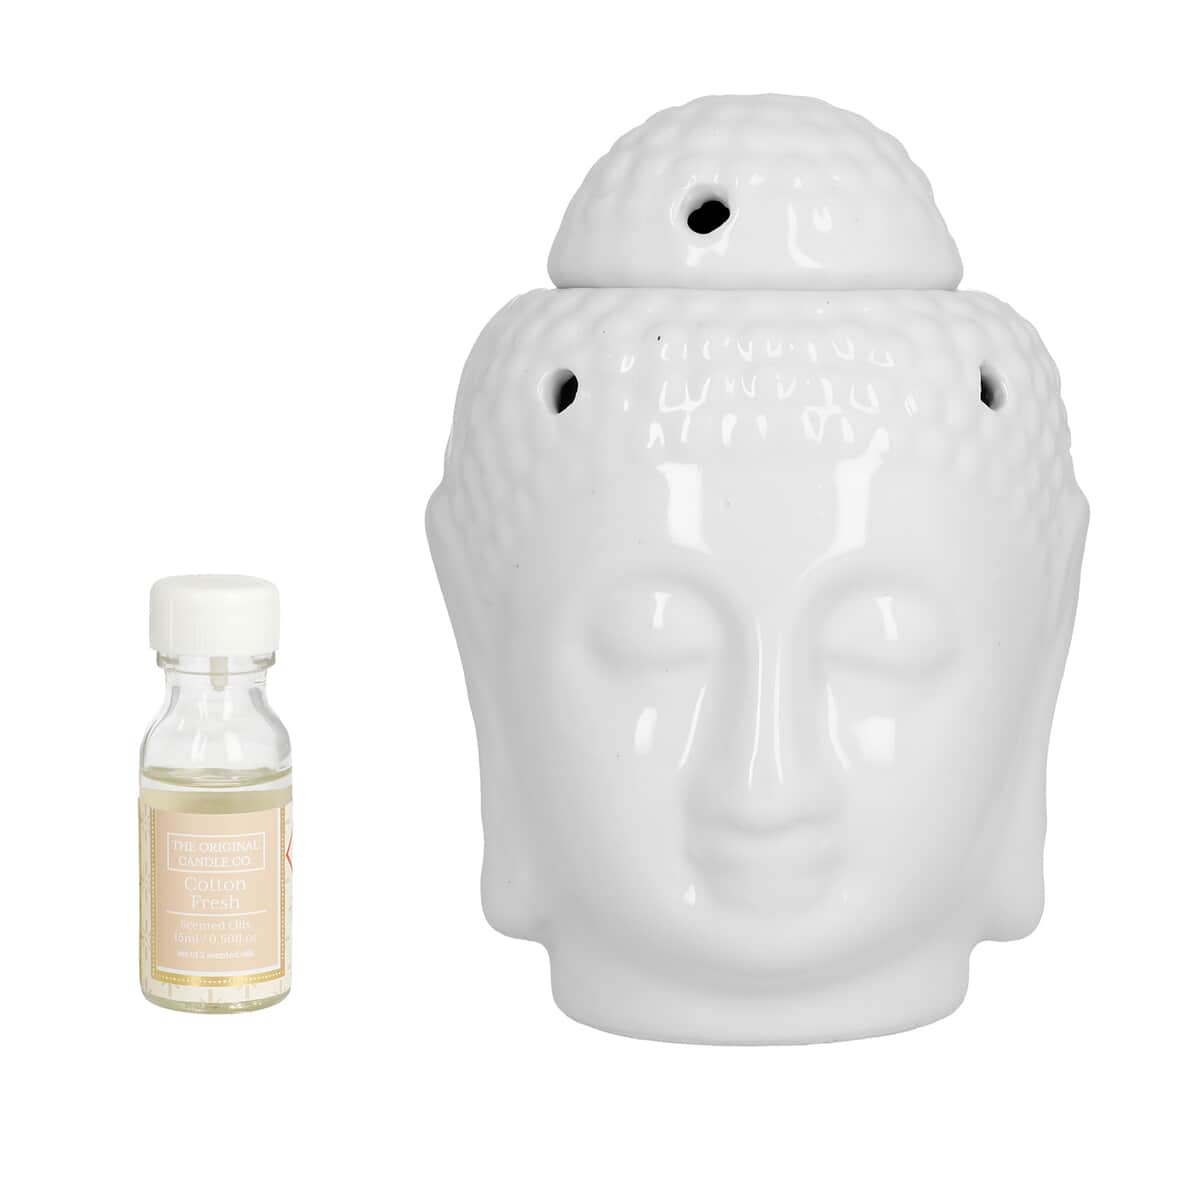 White Ceramic Buddha Head Tealight Candle Holder with Aromatherapy Oil Burner (5.75x4.5x4.25) image number 0